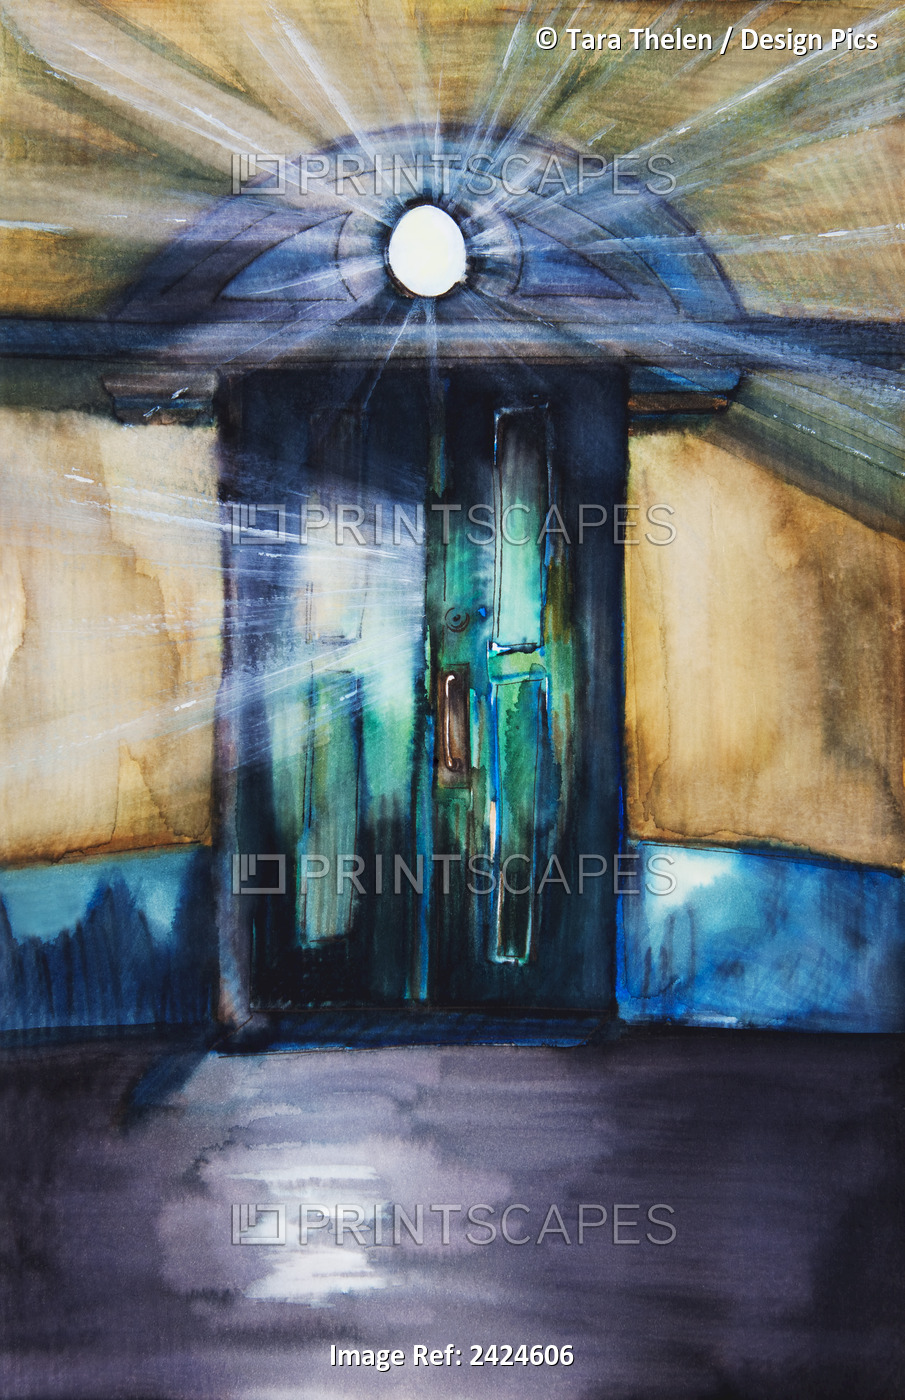 Watercolor Painting Of An Opening Door Filled With Light.